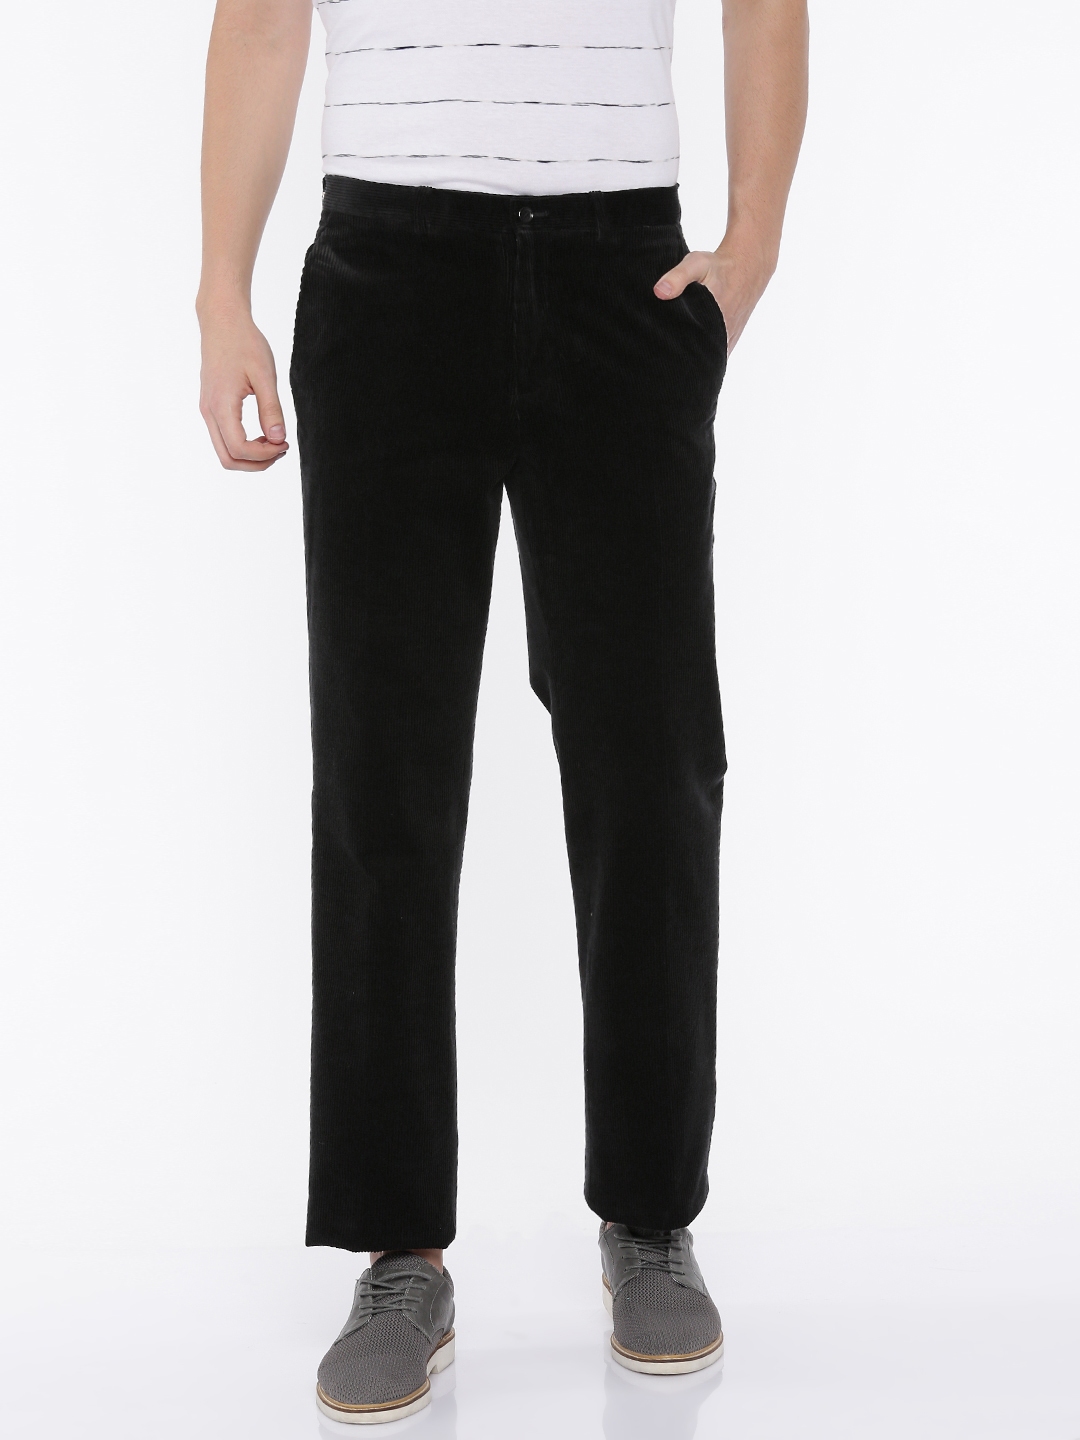 Mens Cord Trousers  Mens Corduroy Trousers  House Of Bruar